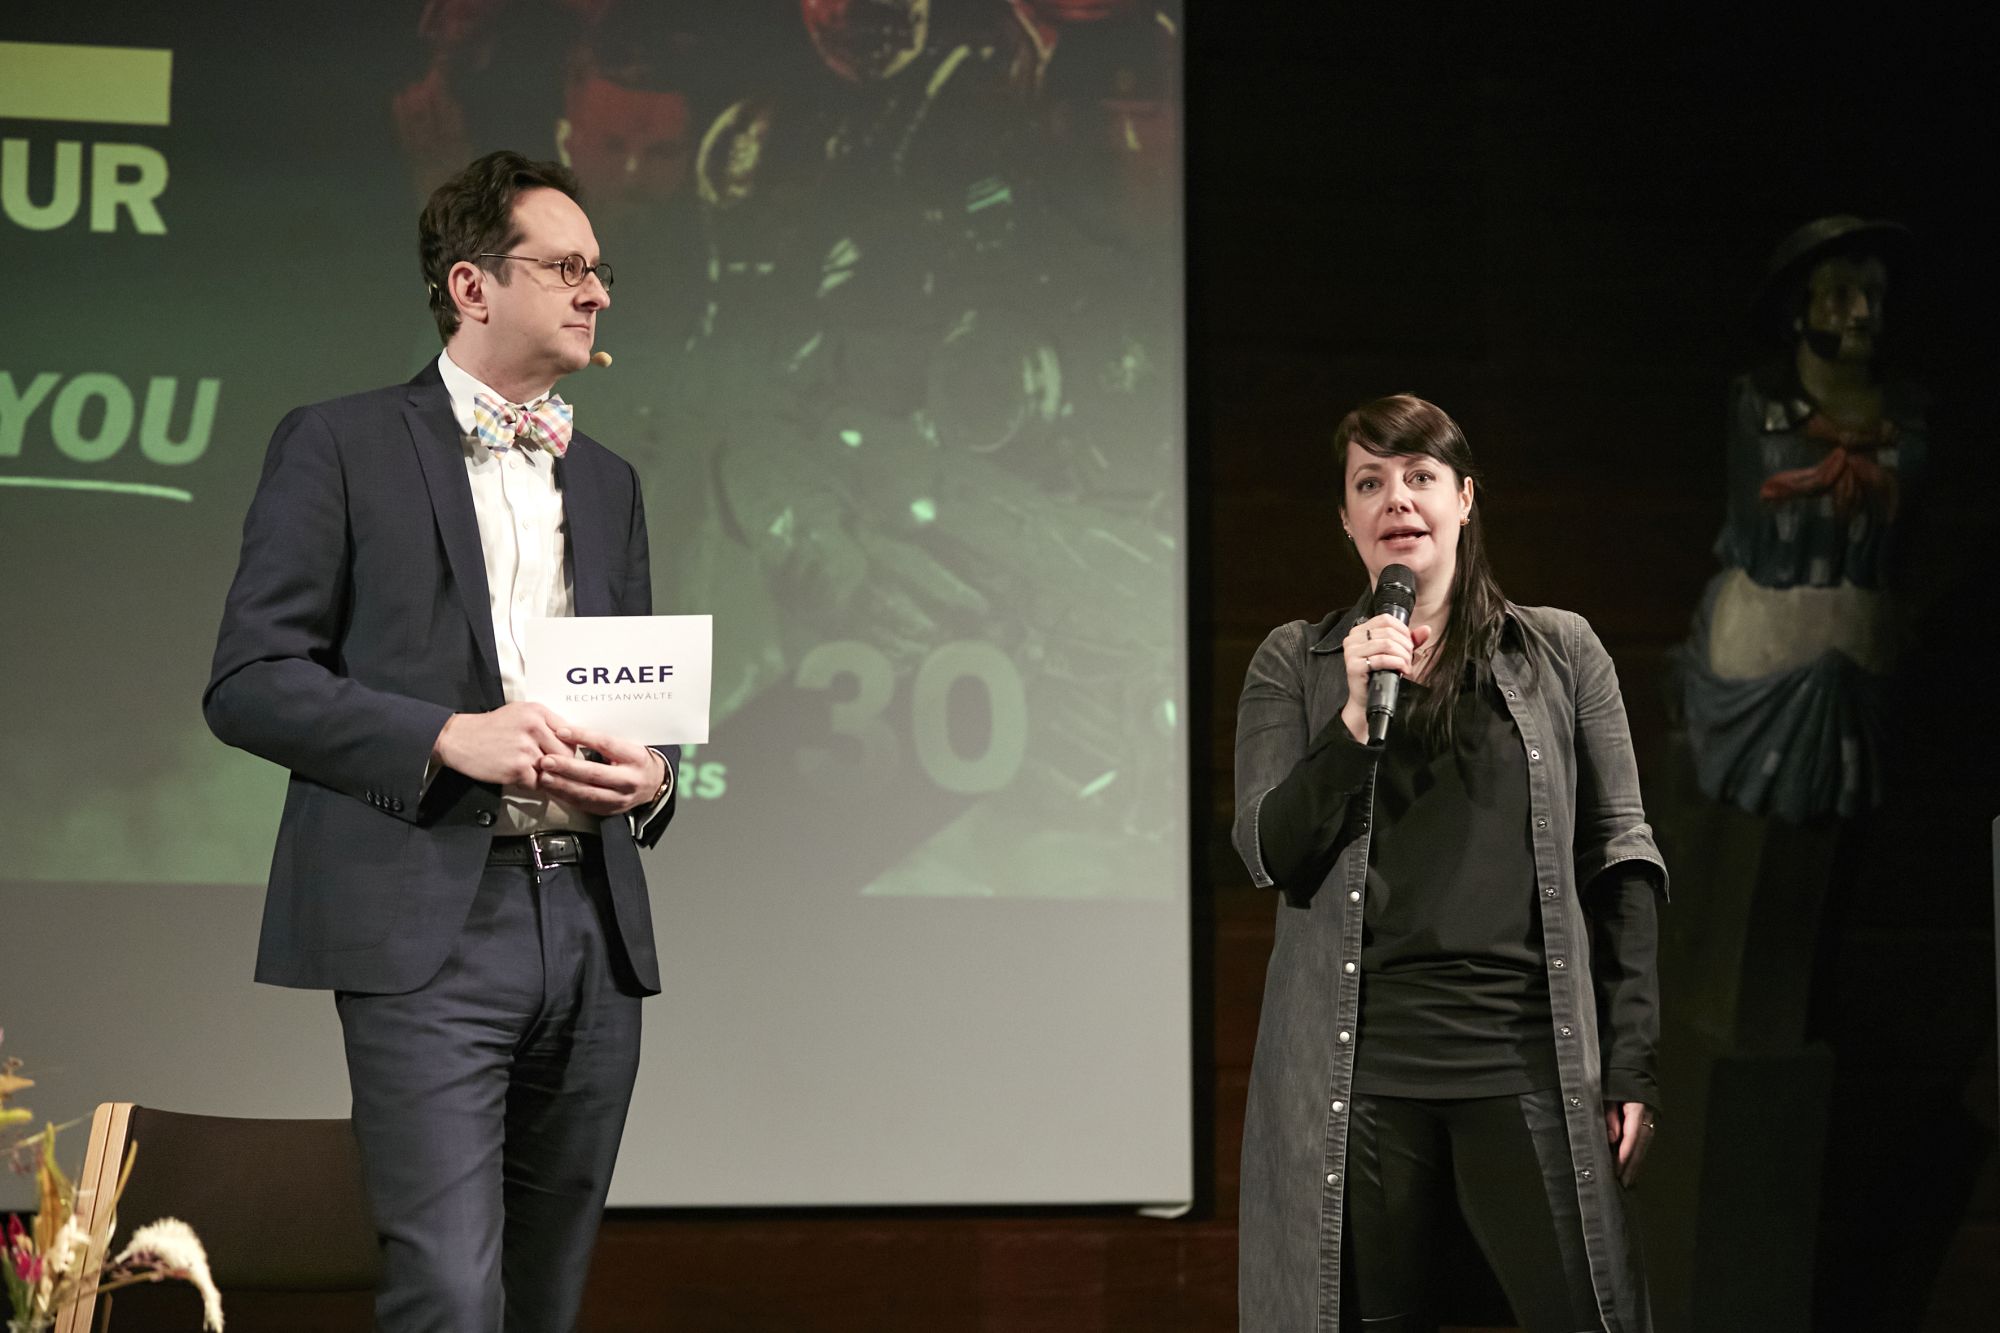 Stephanie Marchand answering questions from the audience (together with moderator Christian Rauda) | Photo by Rolf Otzipka